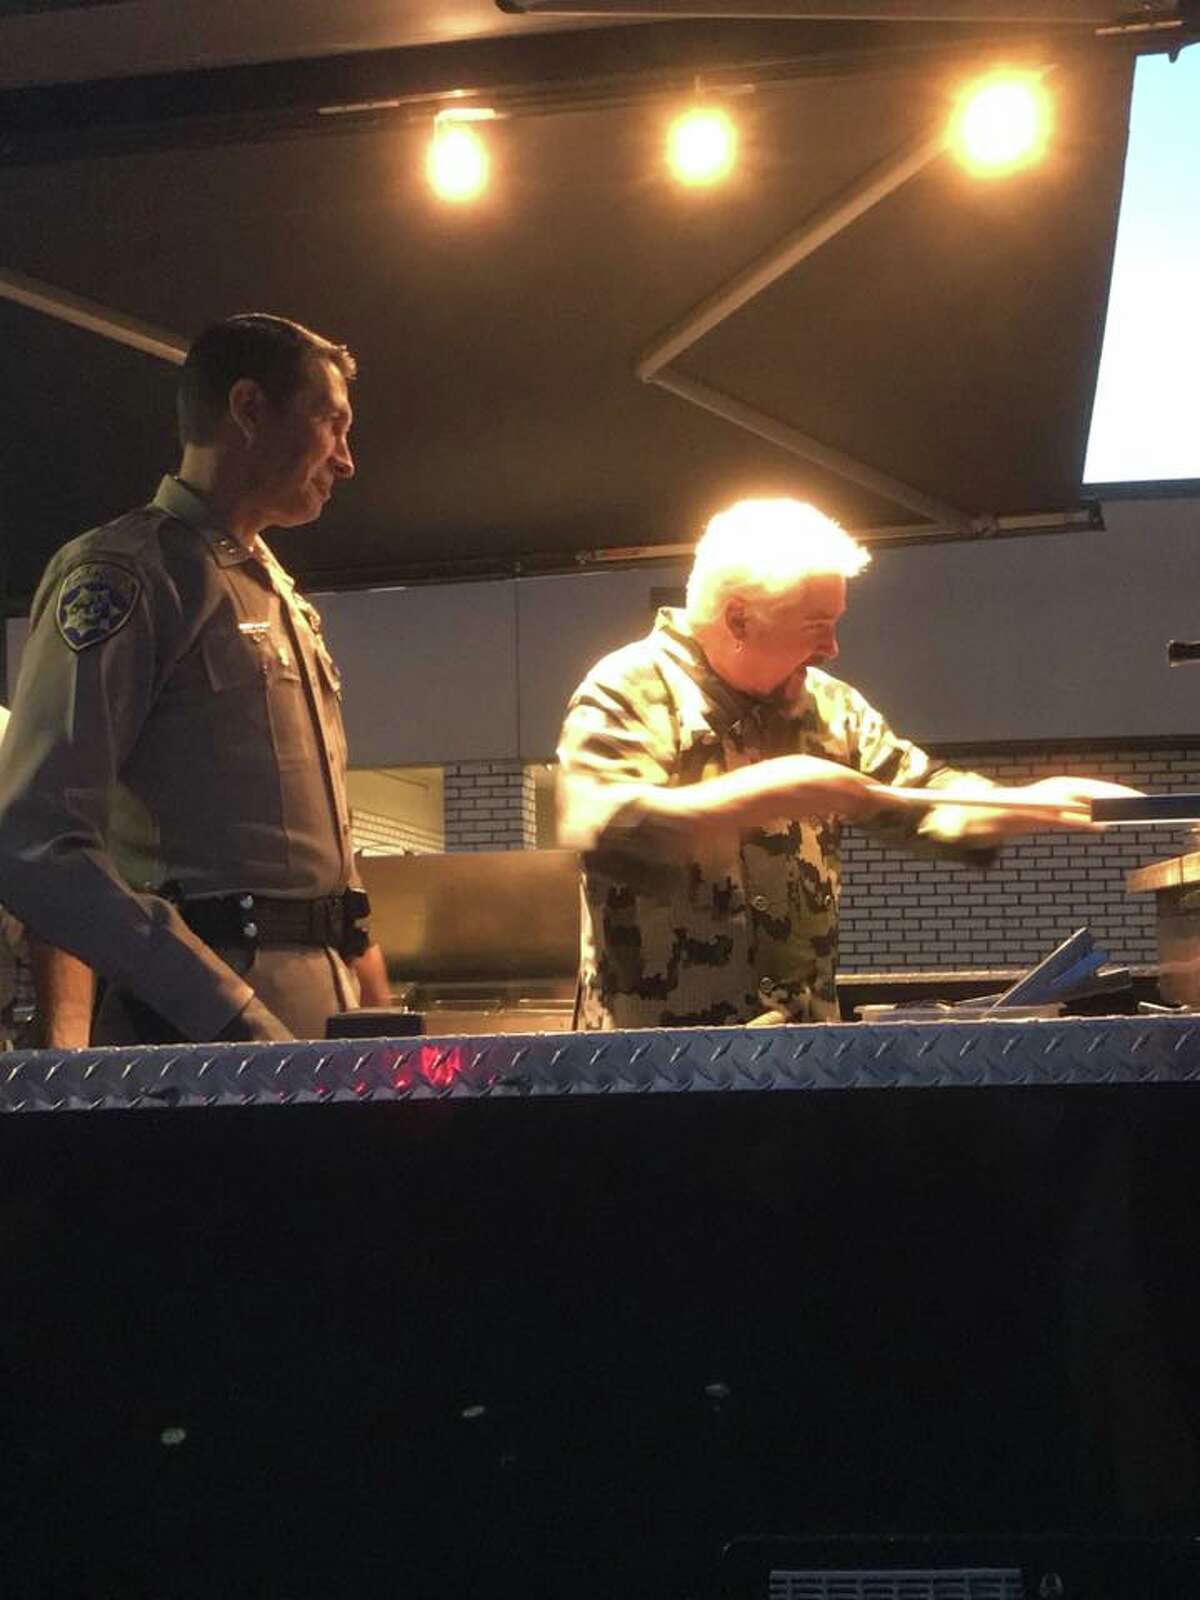 Chef and Santa Rosa resident Guy Fieri was "keepin it local" this week, and visited a few local spots while filming "Diners, Drive-Ins and Dives."